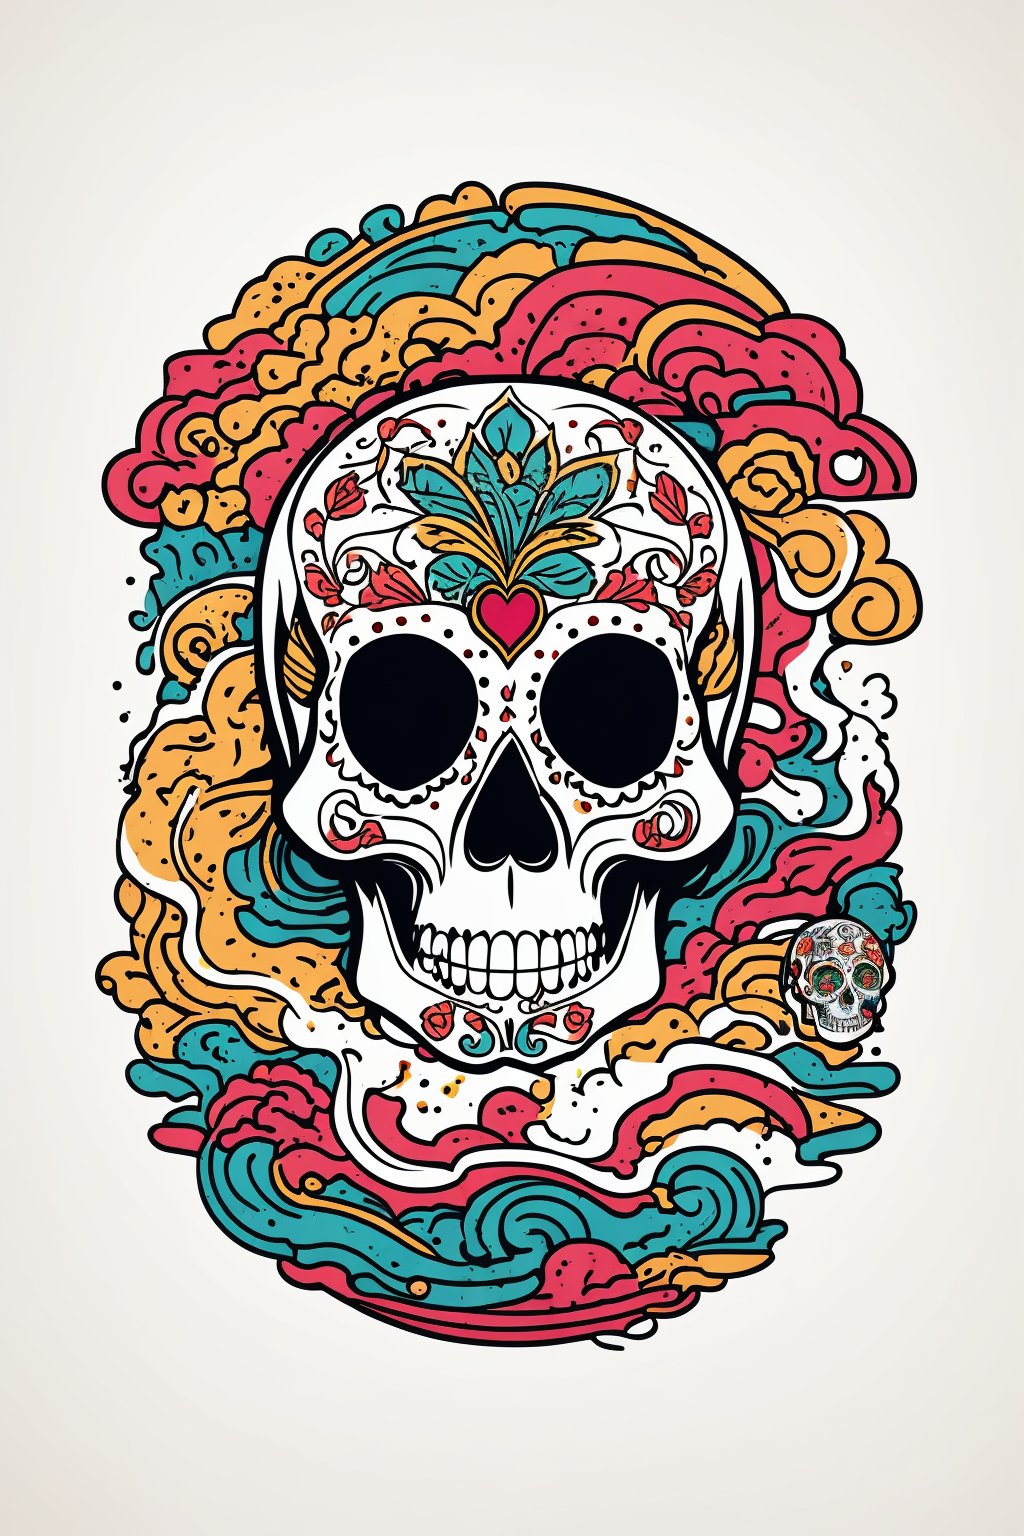 vector t shirt design, vector illustration, abstract representation of sugar skull in a isometric view. jose guadalupe posada style, street art, swirling colors, symbolizing new life and hope. white background, complementary colors